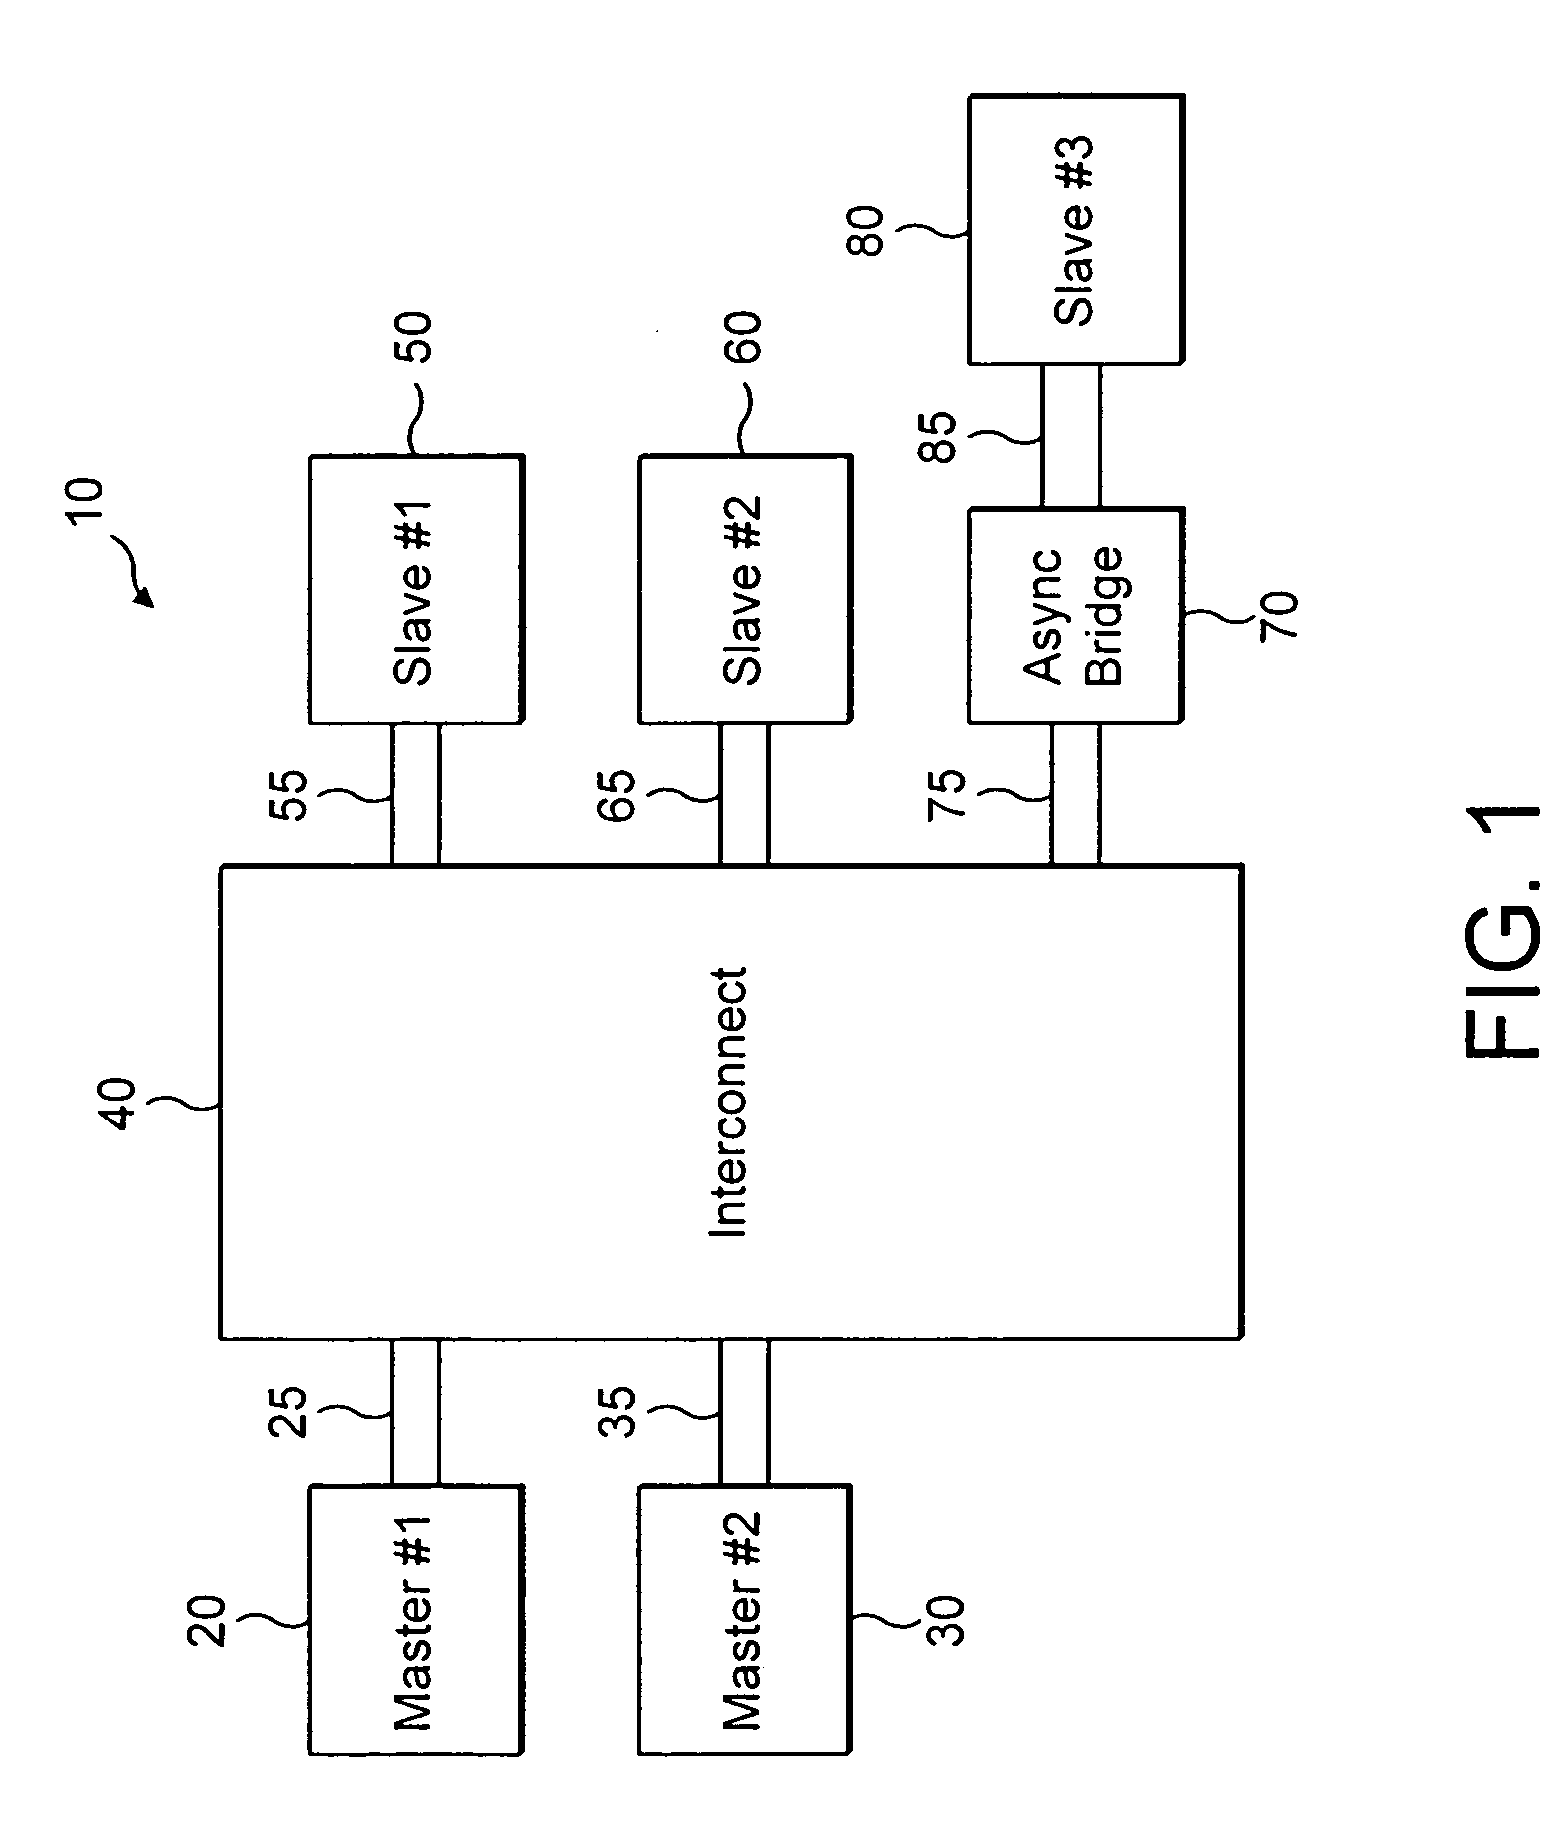 Handling of write transactions in a data processing apparatus